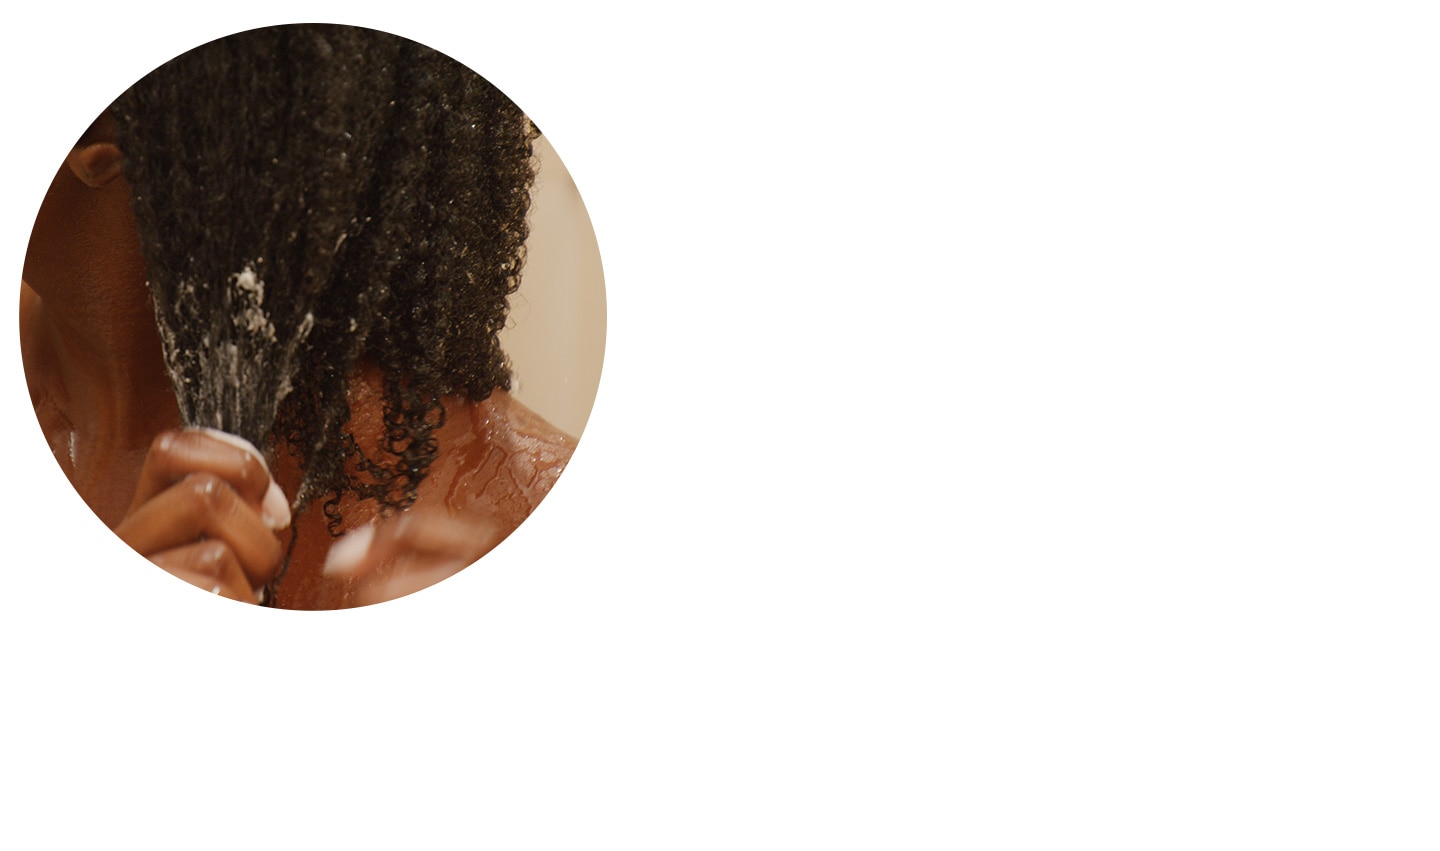 Step 2: Condition with be curly advanced intensive curl perfecting masque or conditioner